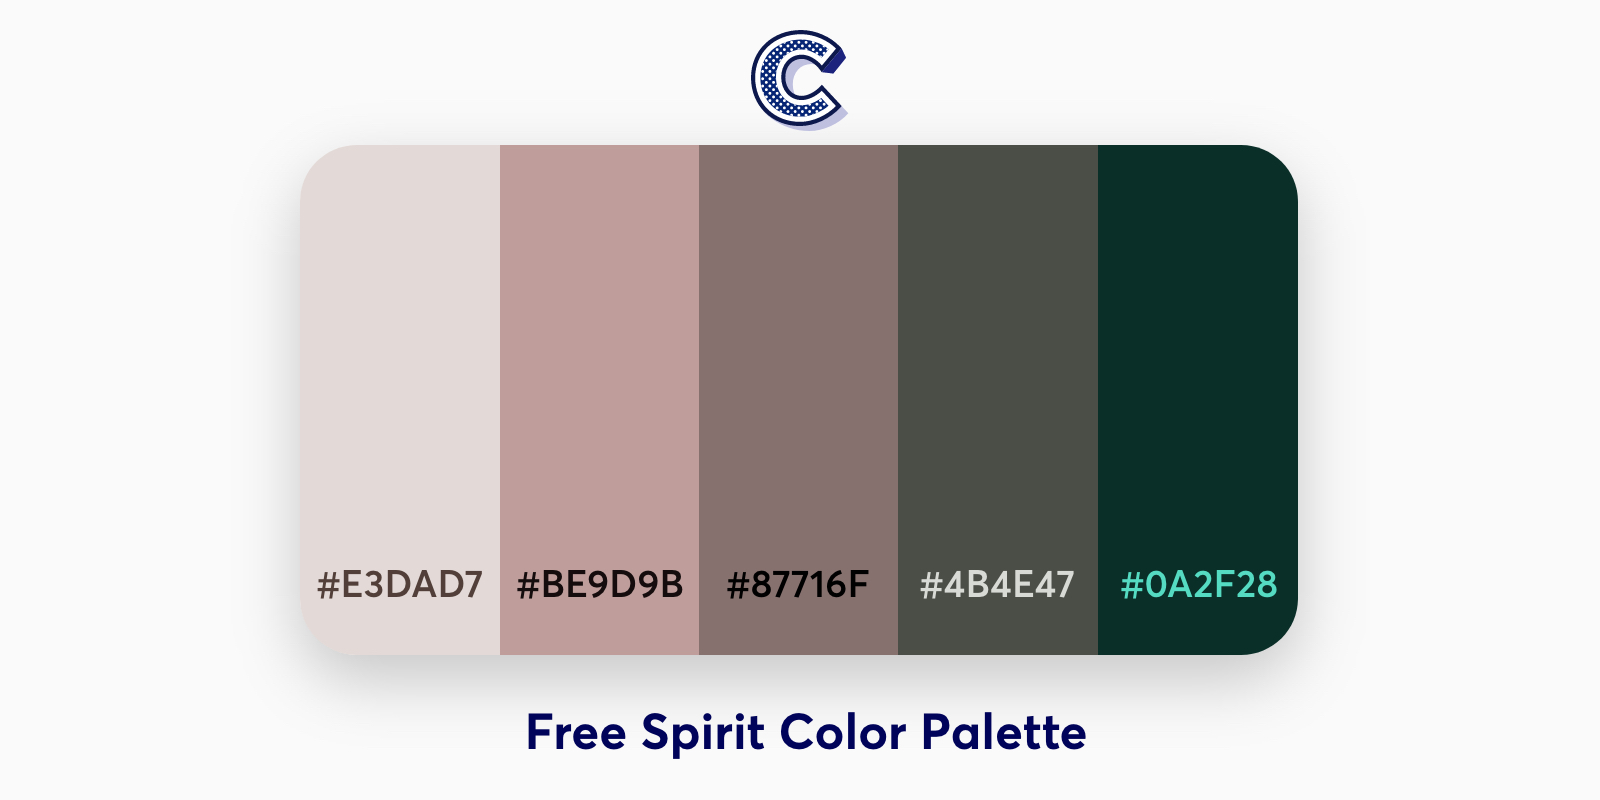 the featured image of free spirit color palette